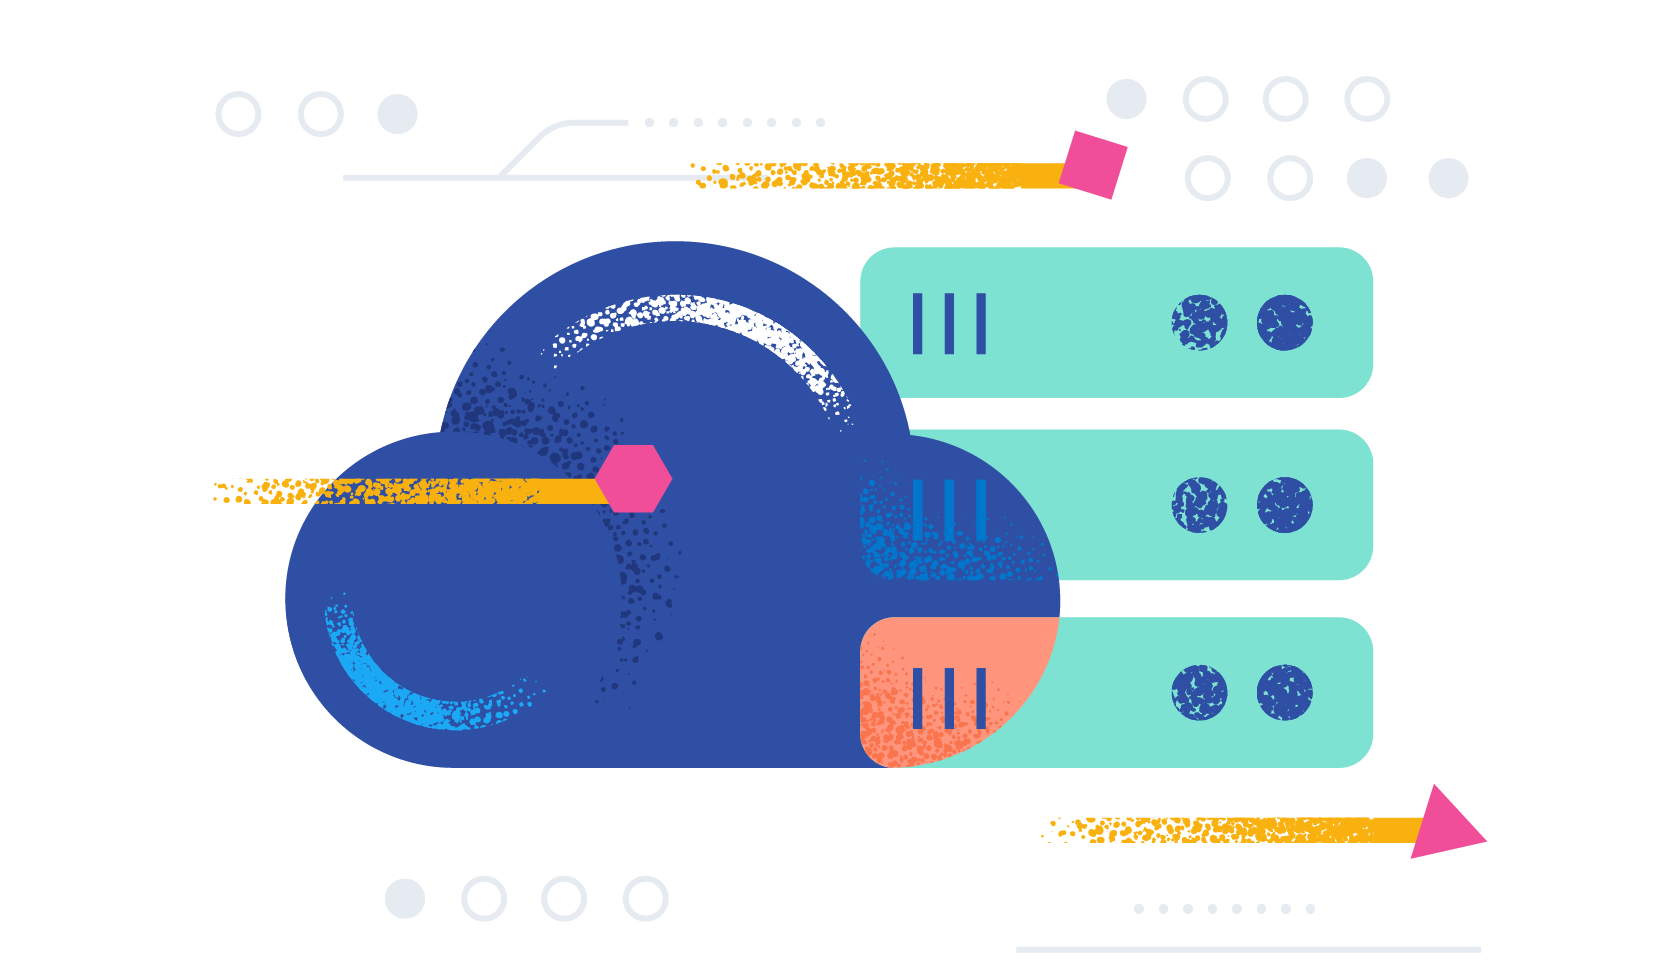 Cloud migration workflow using CCS and CCR